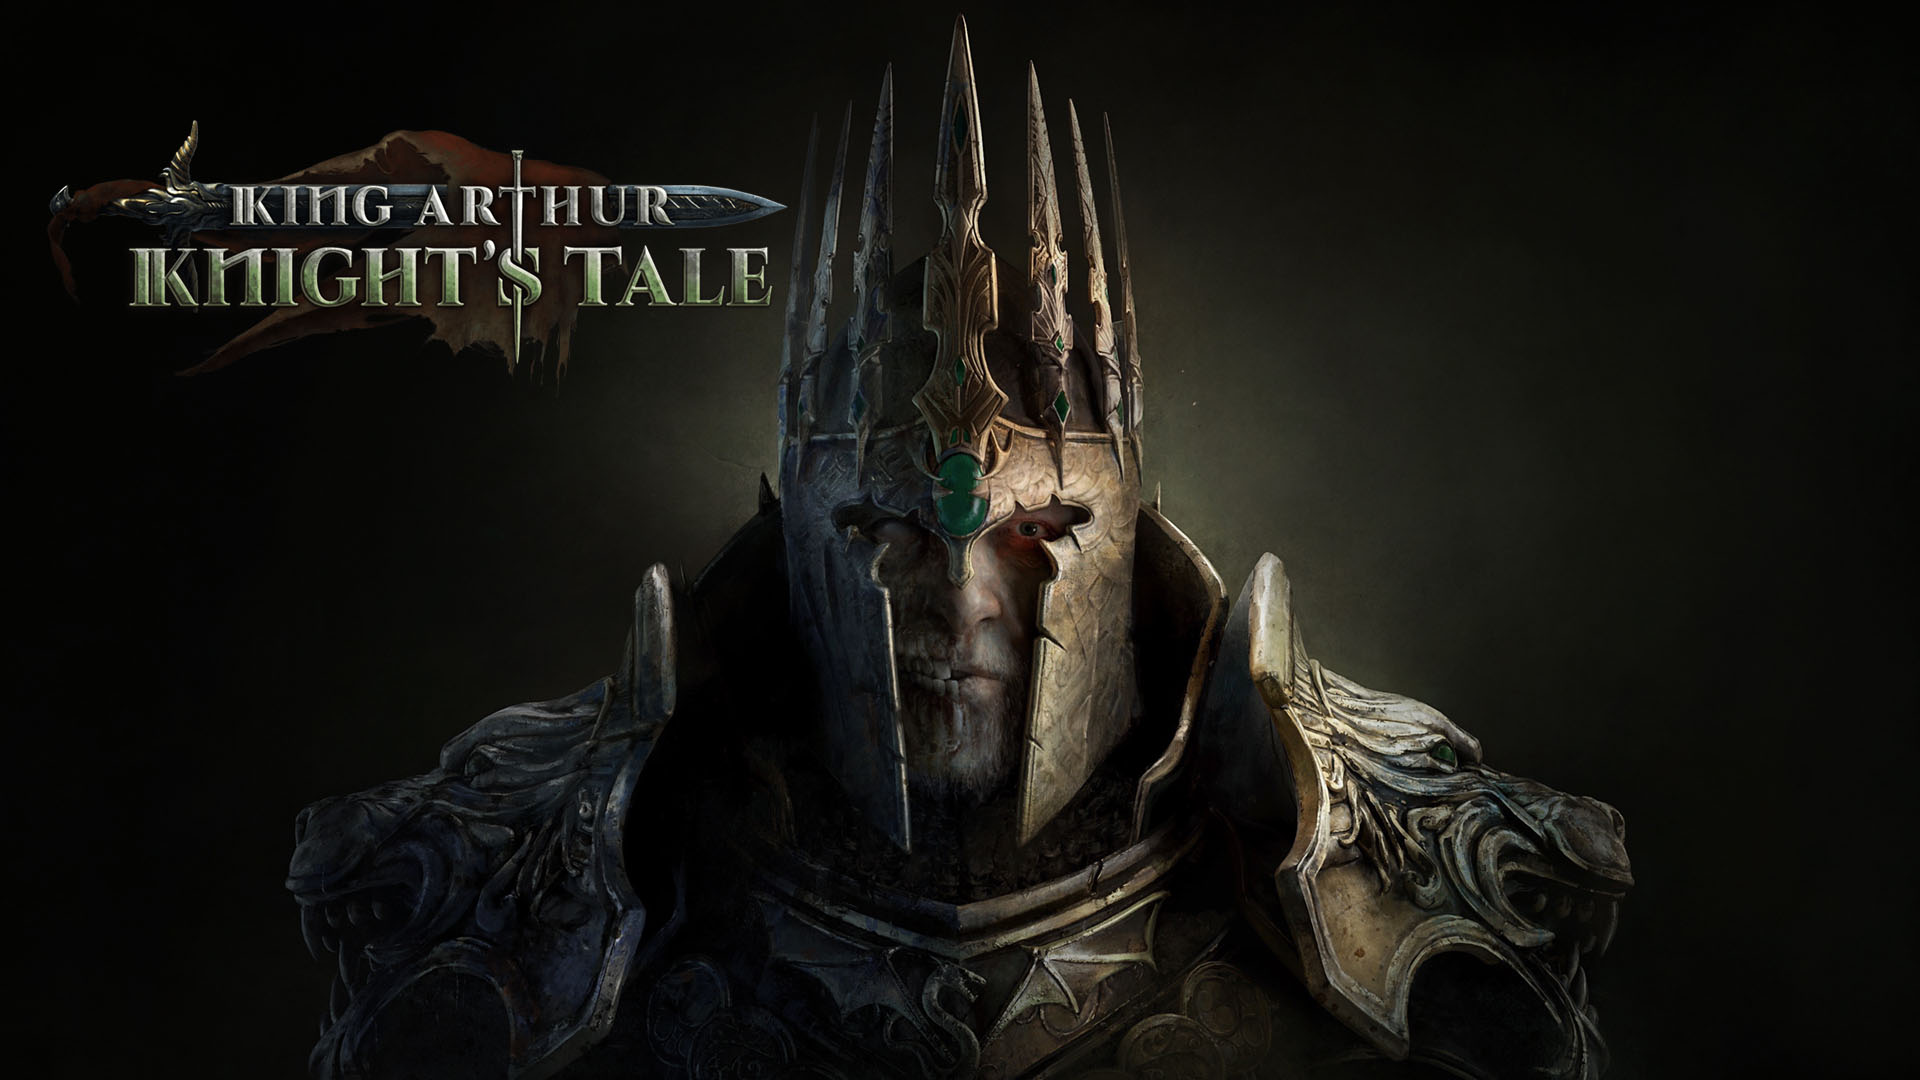 King Arthur: Knight's Tale is now available